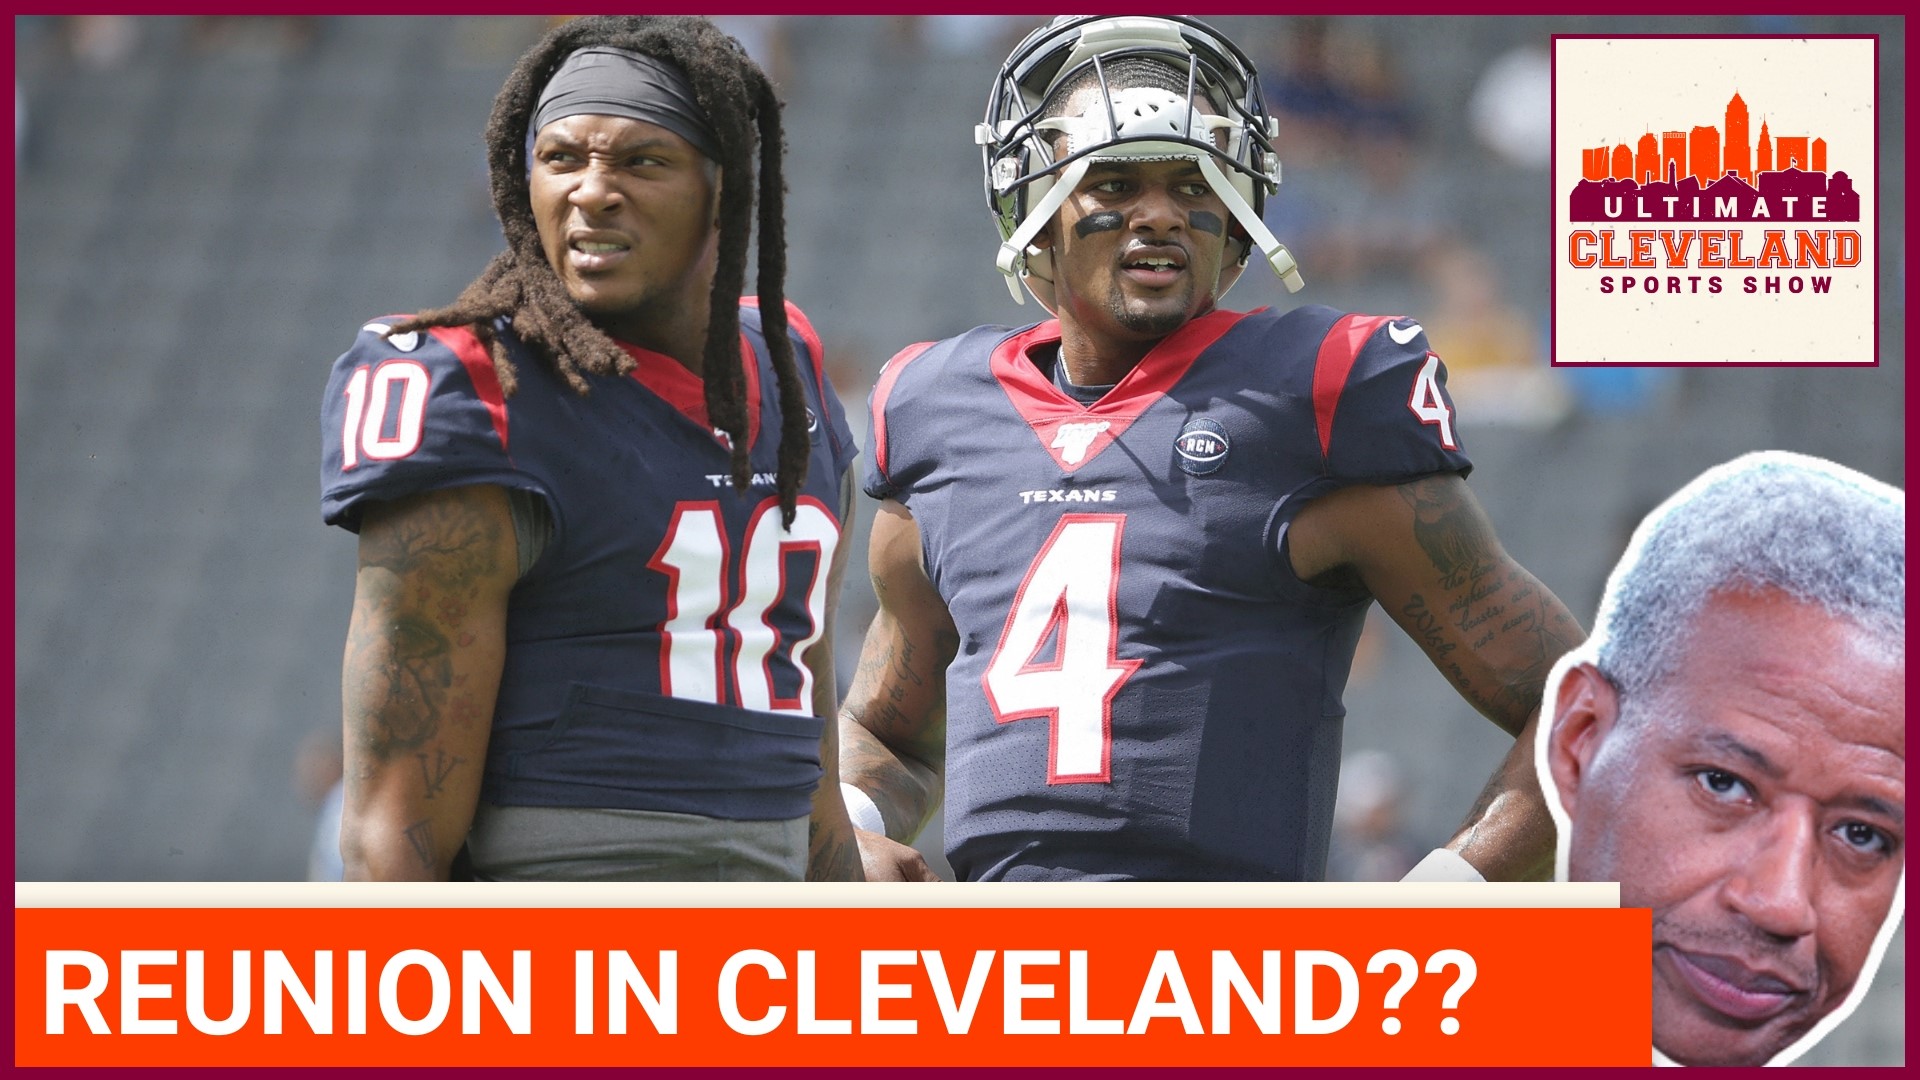 On "The Q" podcast, Cleveland Browns quarterback said he'll "be in the same" area as Arizona Cardinals WR DeAndre Hopkins this weekend.